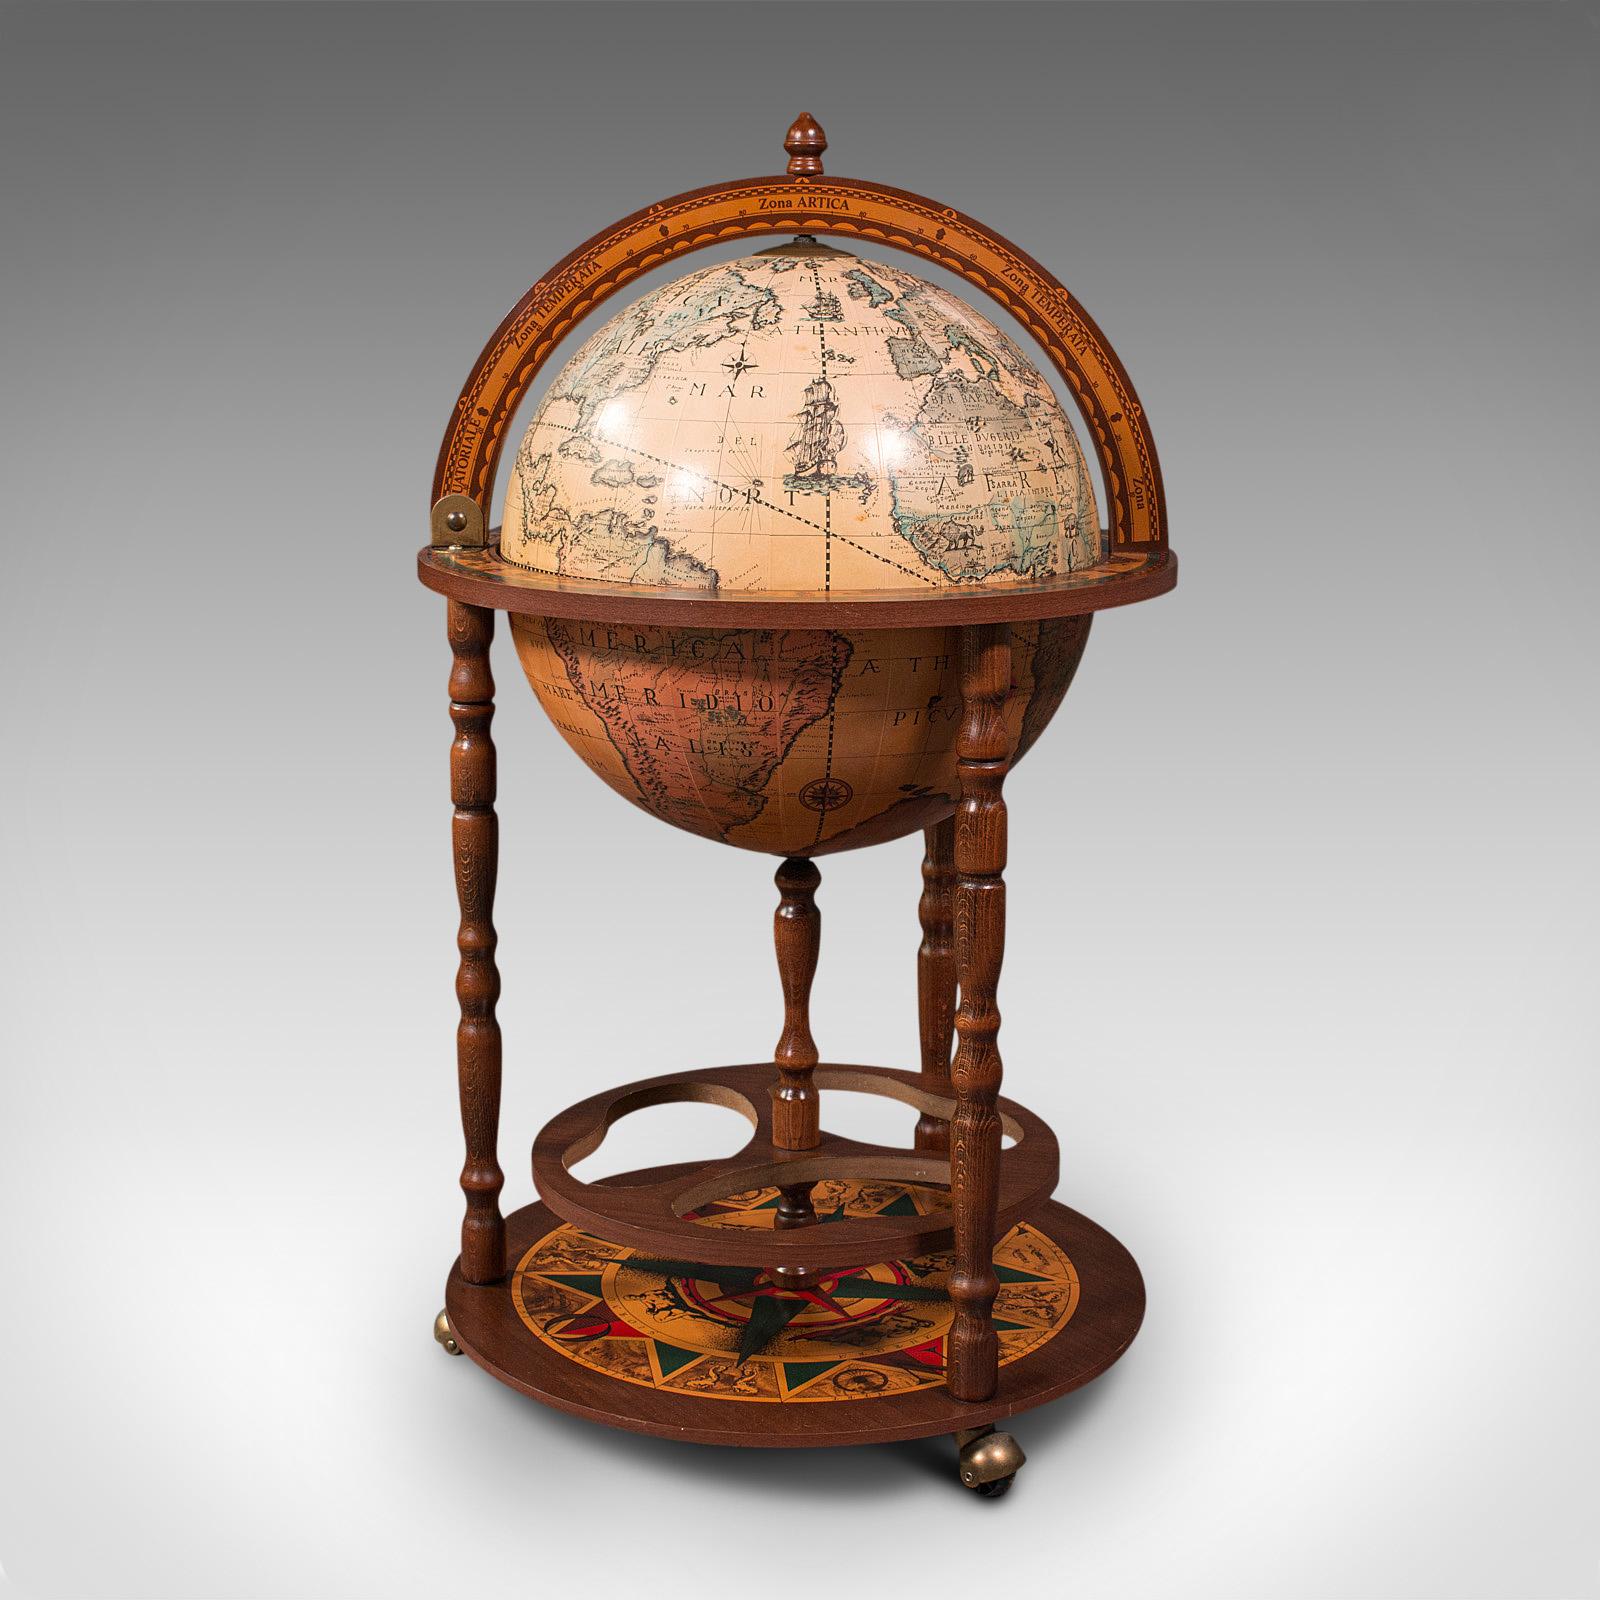 This is a vintage decorative cocktail globe. A Continental, composite hardwood drinks trolley cabinet, dating to the late 20th century, circa 1970.

Classic taste to this charming vintage globe
Displays a desirable aged patina and in good